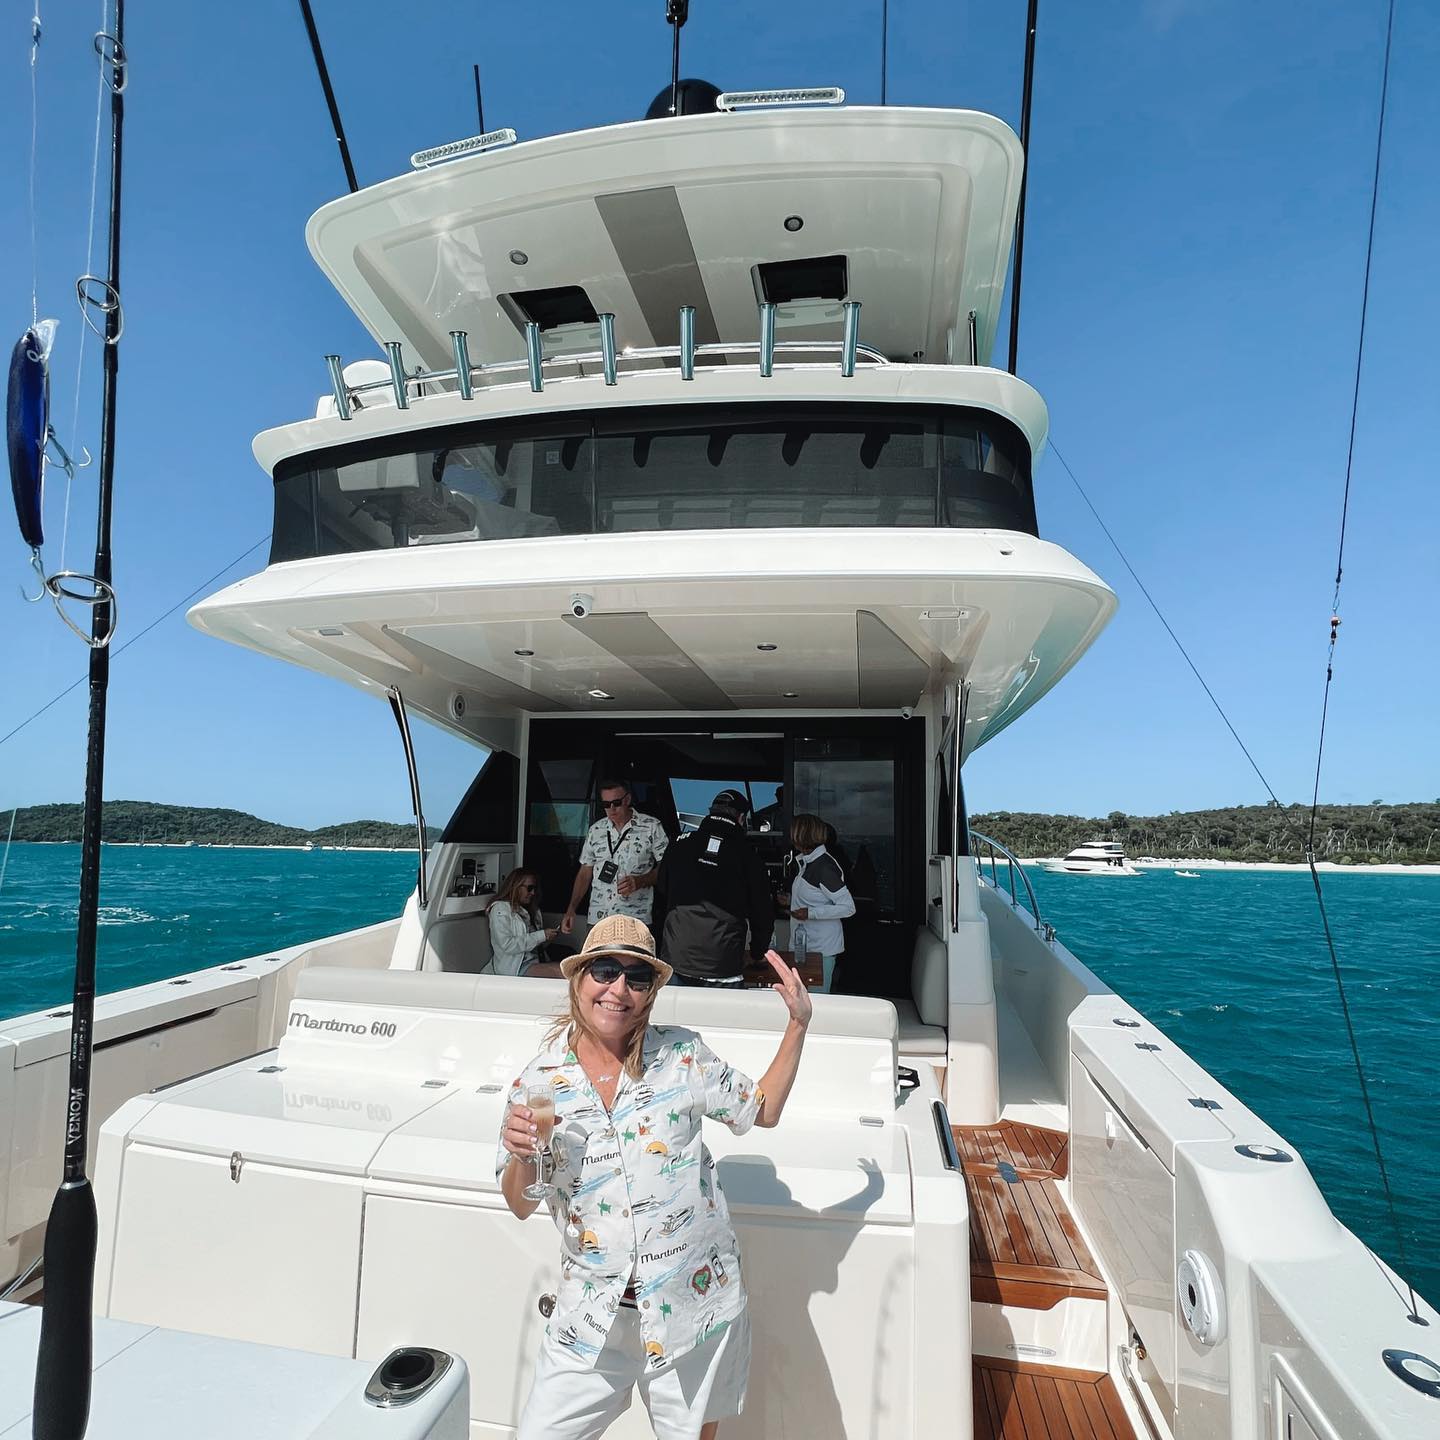 Maritimo Luxury Yachts, GC - Customised Uniforms & Merch designed exclusively for an owners event on Hamilton Island, QLD. 